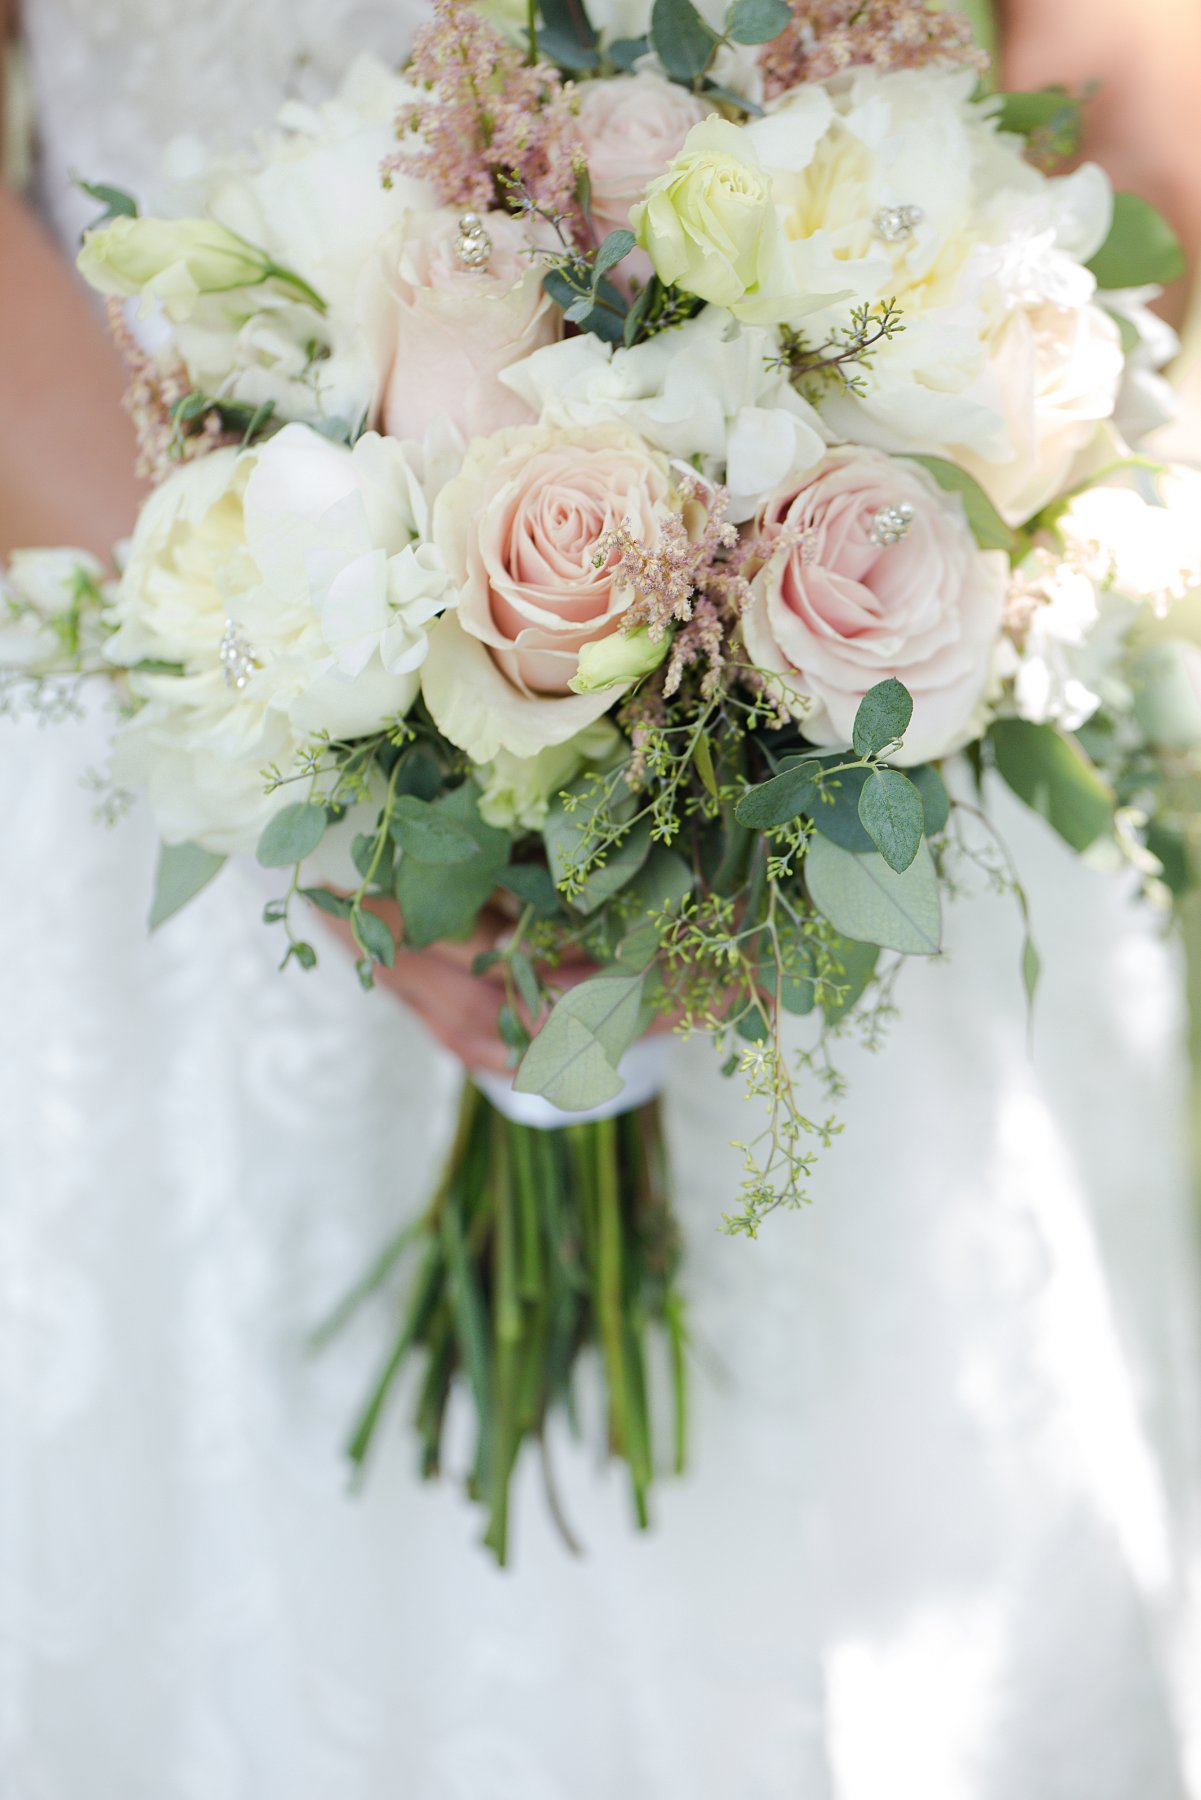 detail photo of wedding bouquet in blush pink and sage green.  Photo by Bismarck wedding photographer Photography by Justine